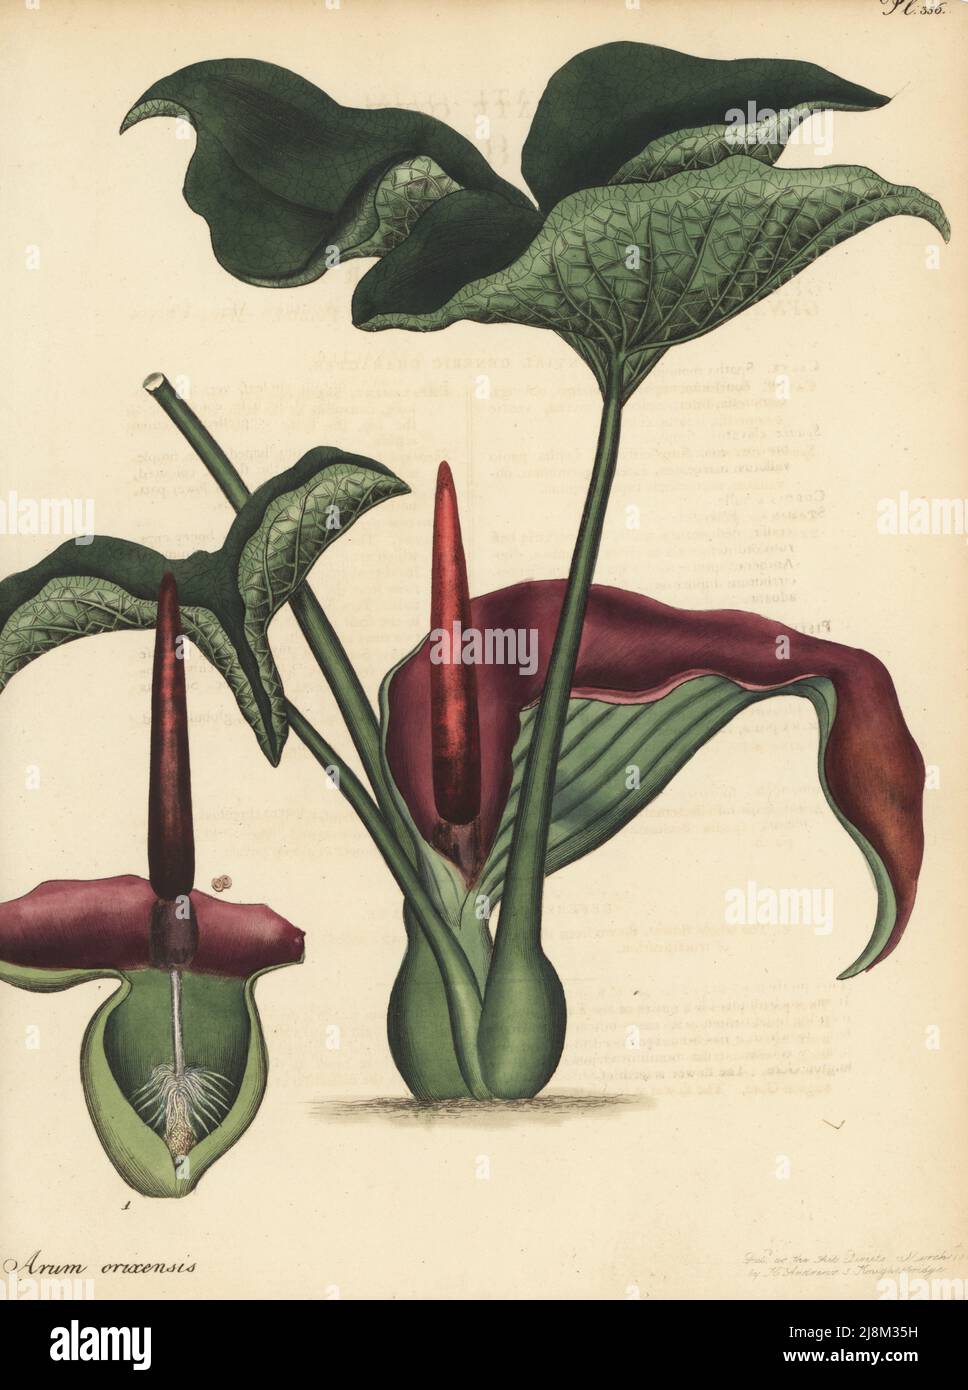 Typhonium trilobatum. Orixian cuckow-pint, Arum orixensis. Native of the East Indies, herbarium collection of James Vere, Kensington Gore. Copperplate engraving drawn, engraved and hand-coloured by Henry Andrews from his Botanical Register, Volume 5, self-published in Knightsbridge, London, 1804. Stock Photo